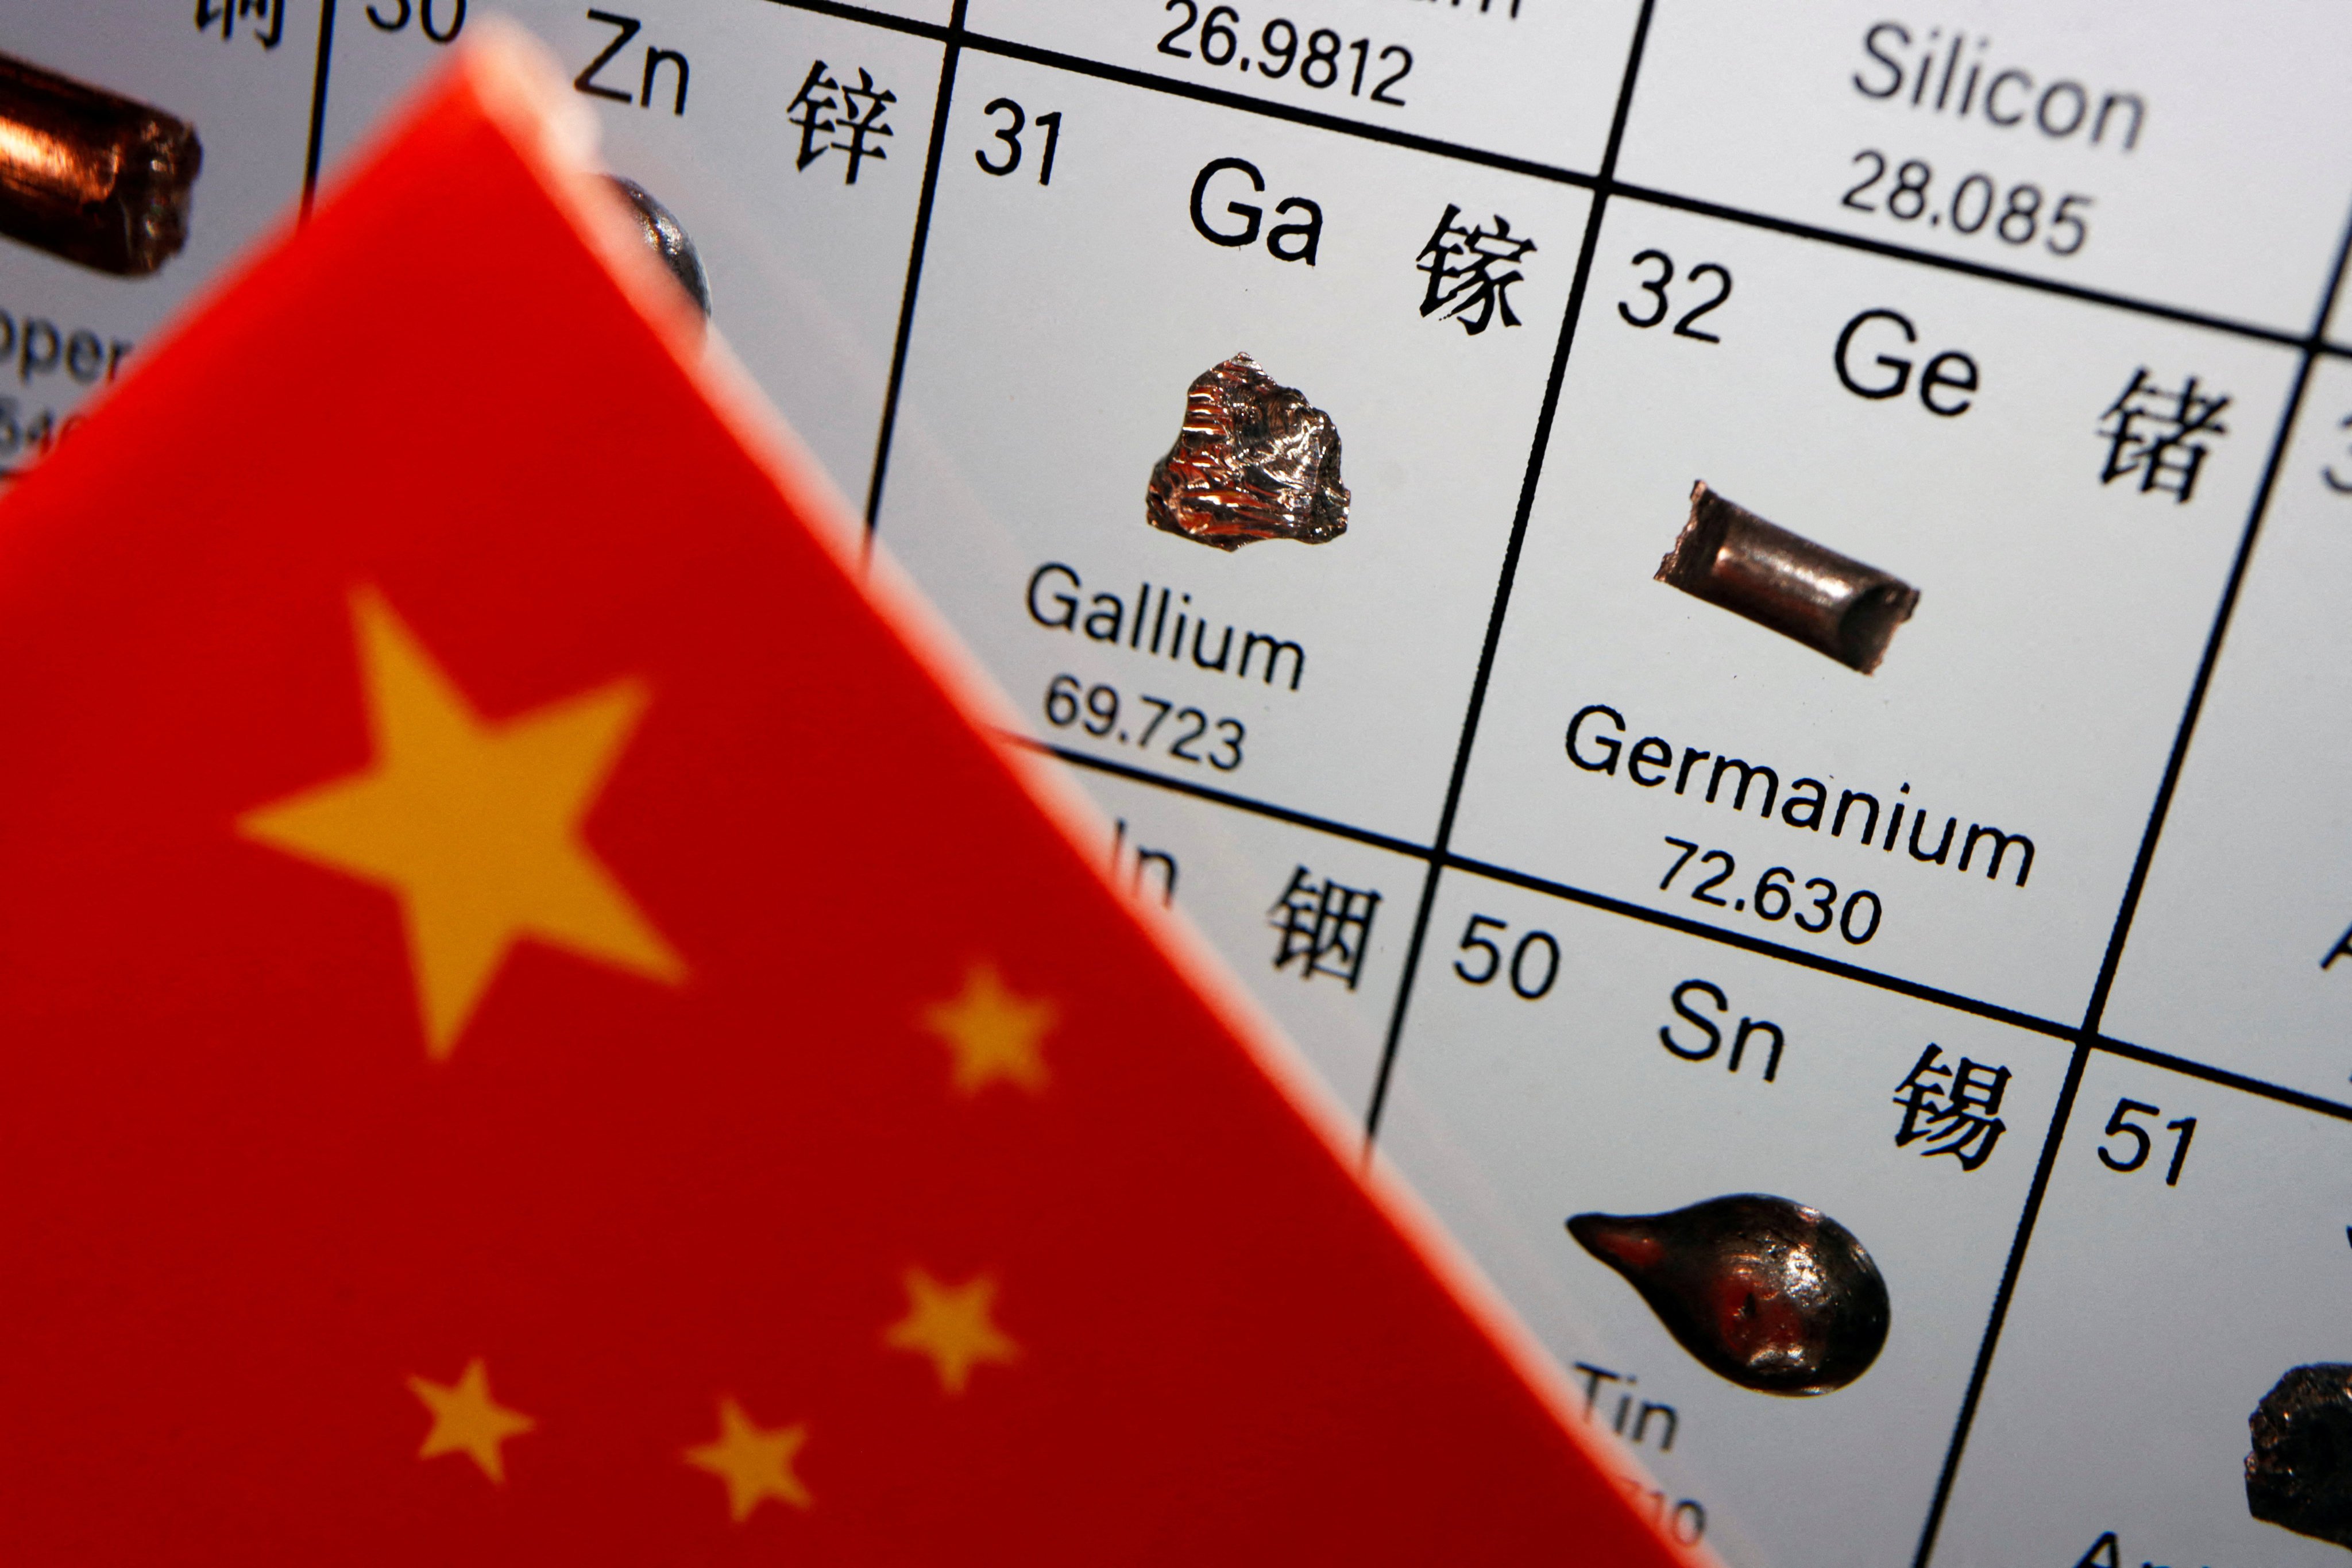 China has imposed export curbs on gallium and germanium, important metals used in semiconductor manufacturing. Photo: Reuters